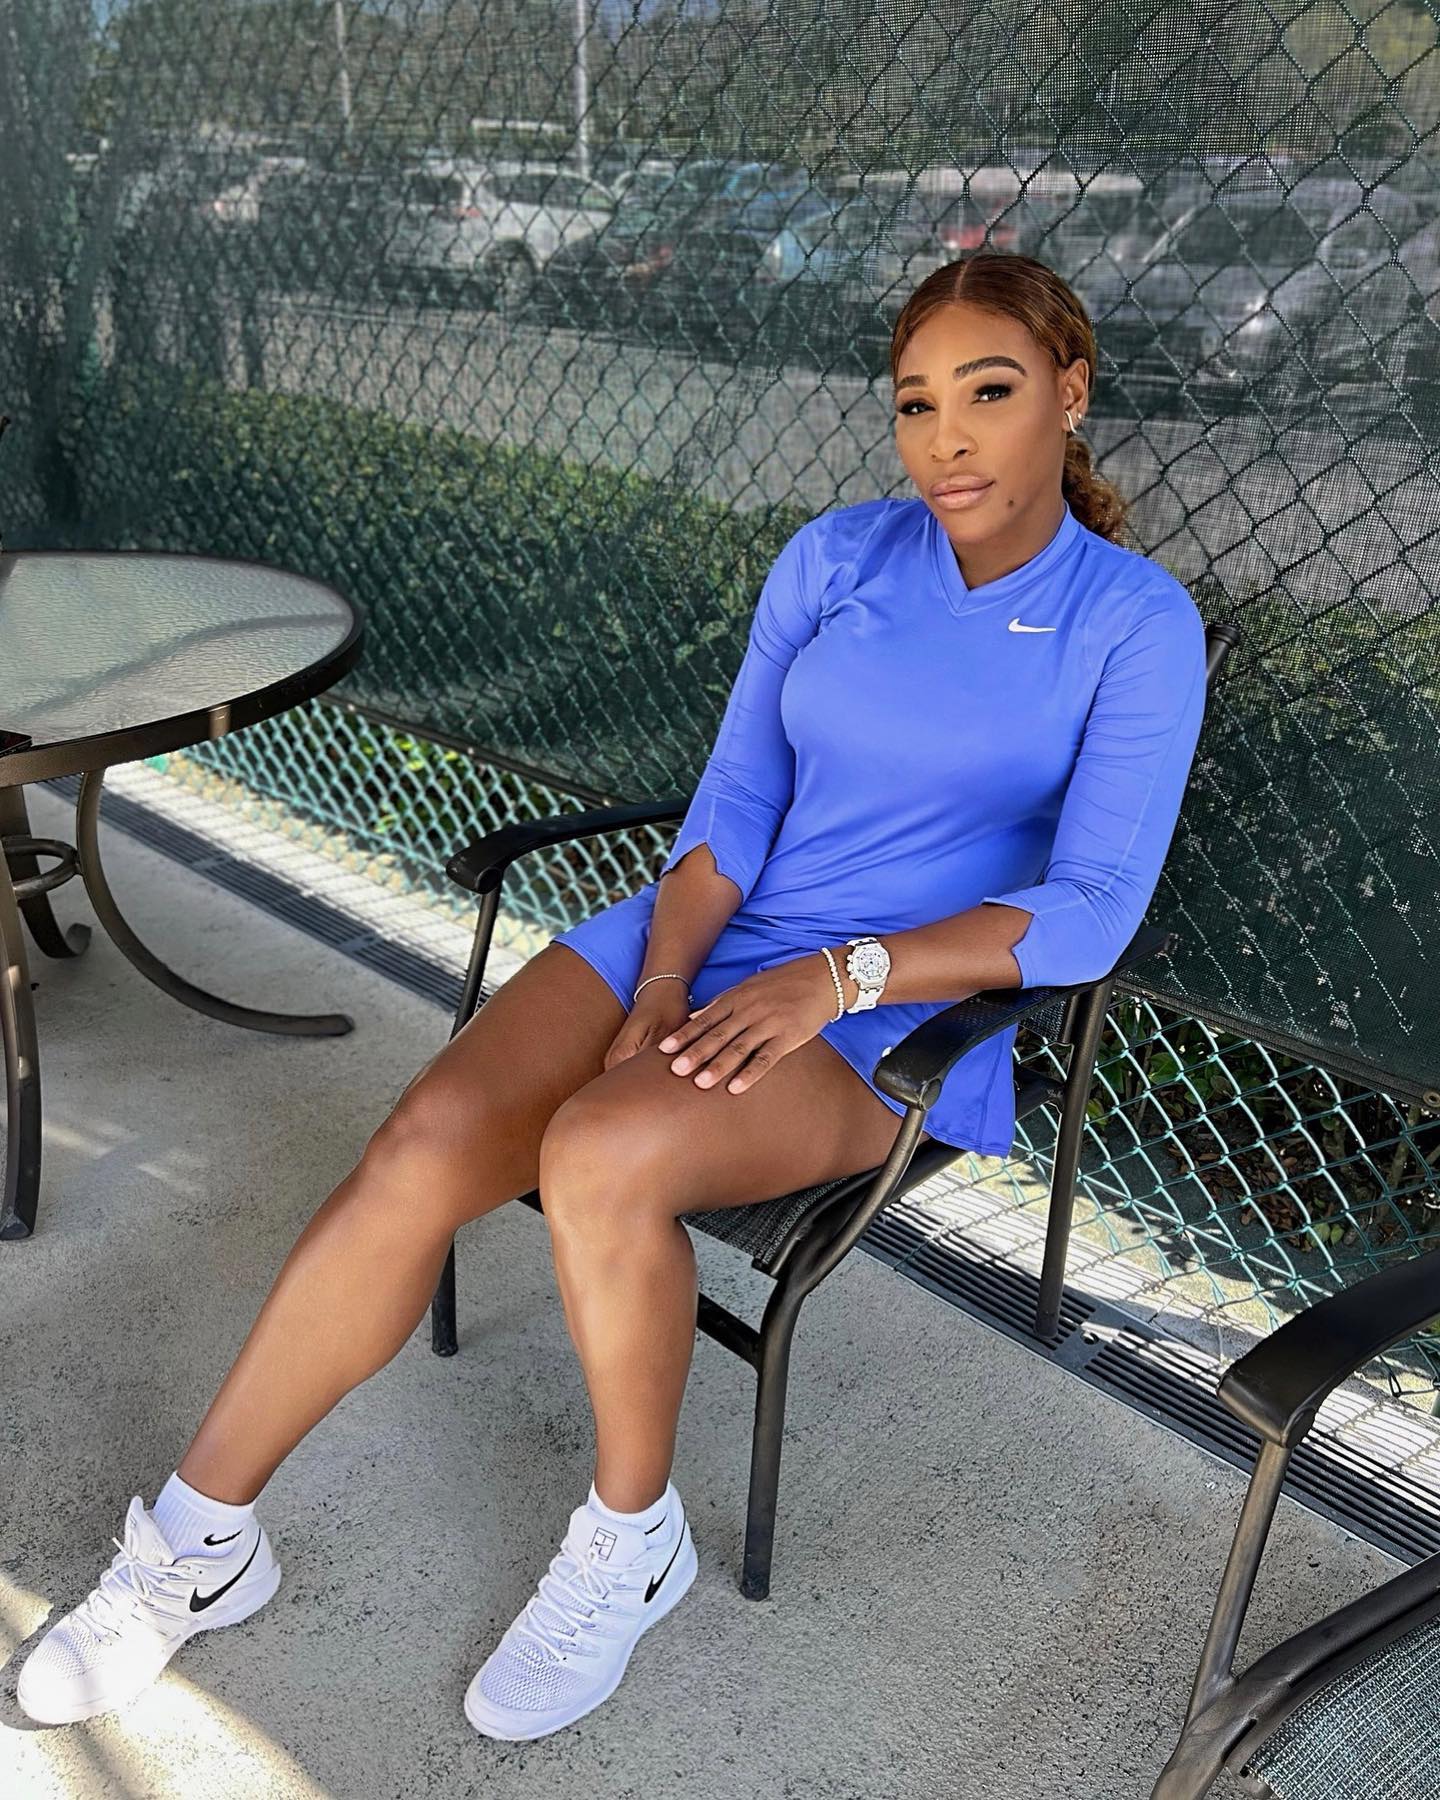 Dupa implicated in Simone Halep doping case, Serena Williams steps into high-sensitivity zone